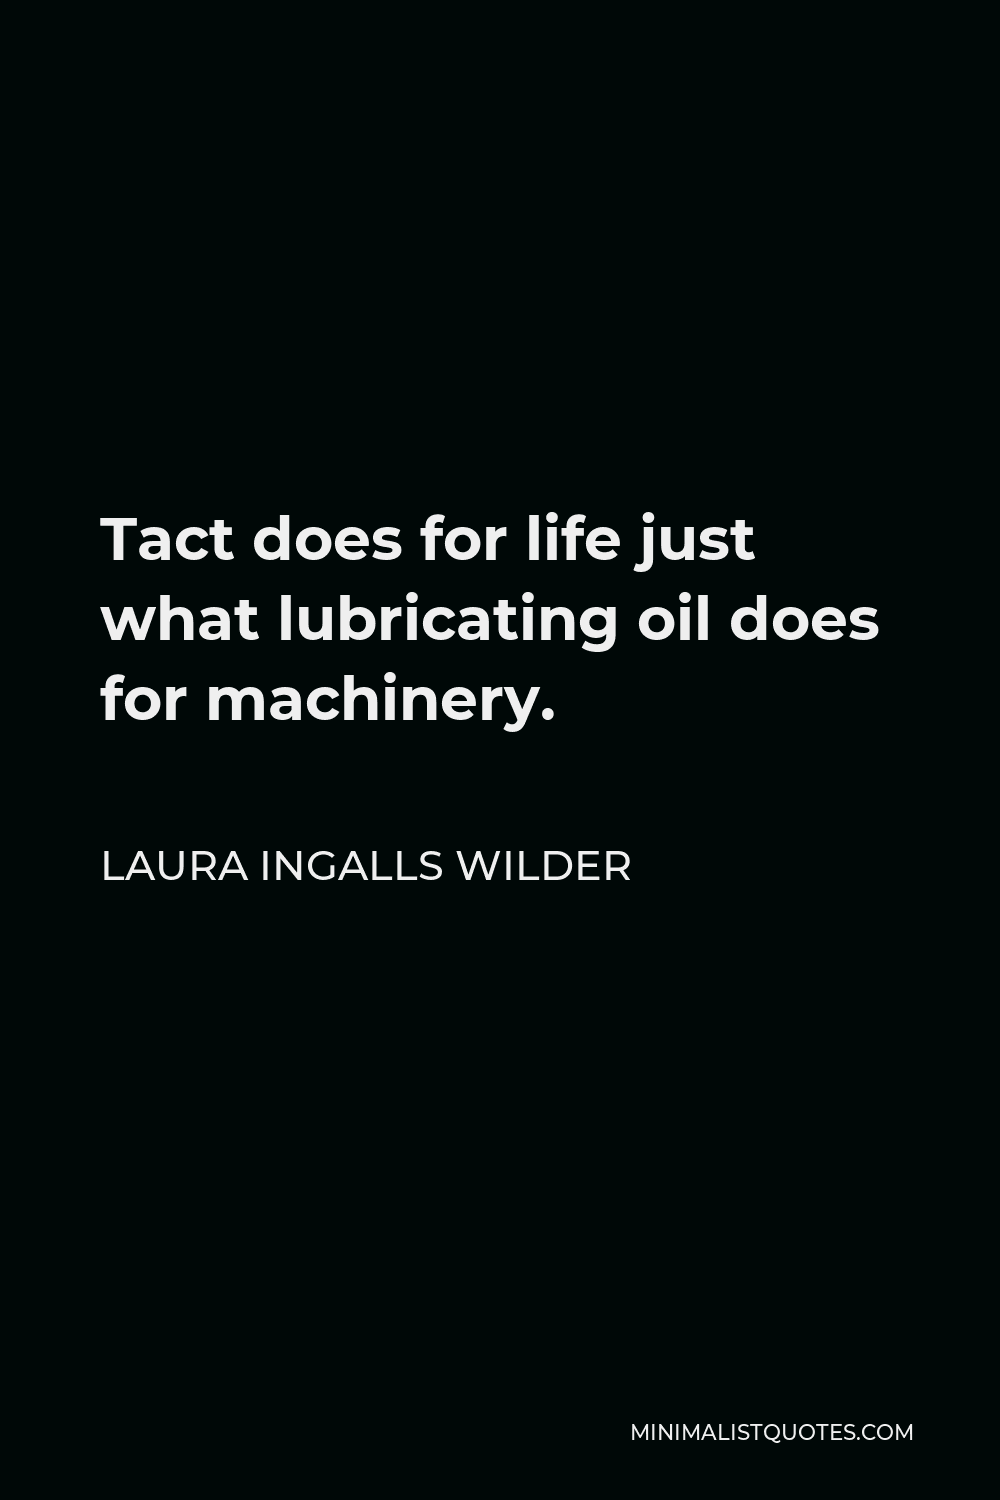 Laura Ingalls Wilder Quote - Tact does for life just what lubricating oil does for machinery.